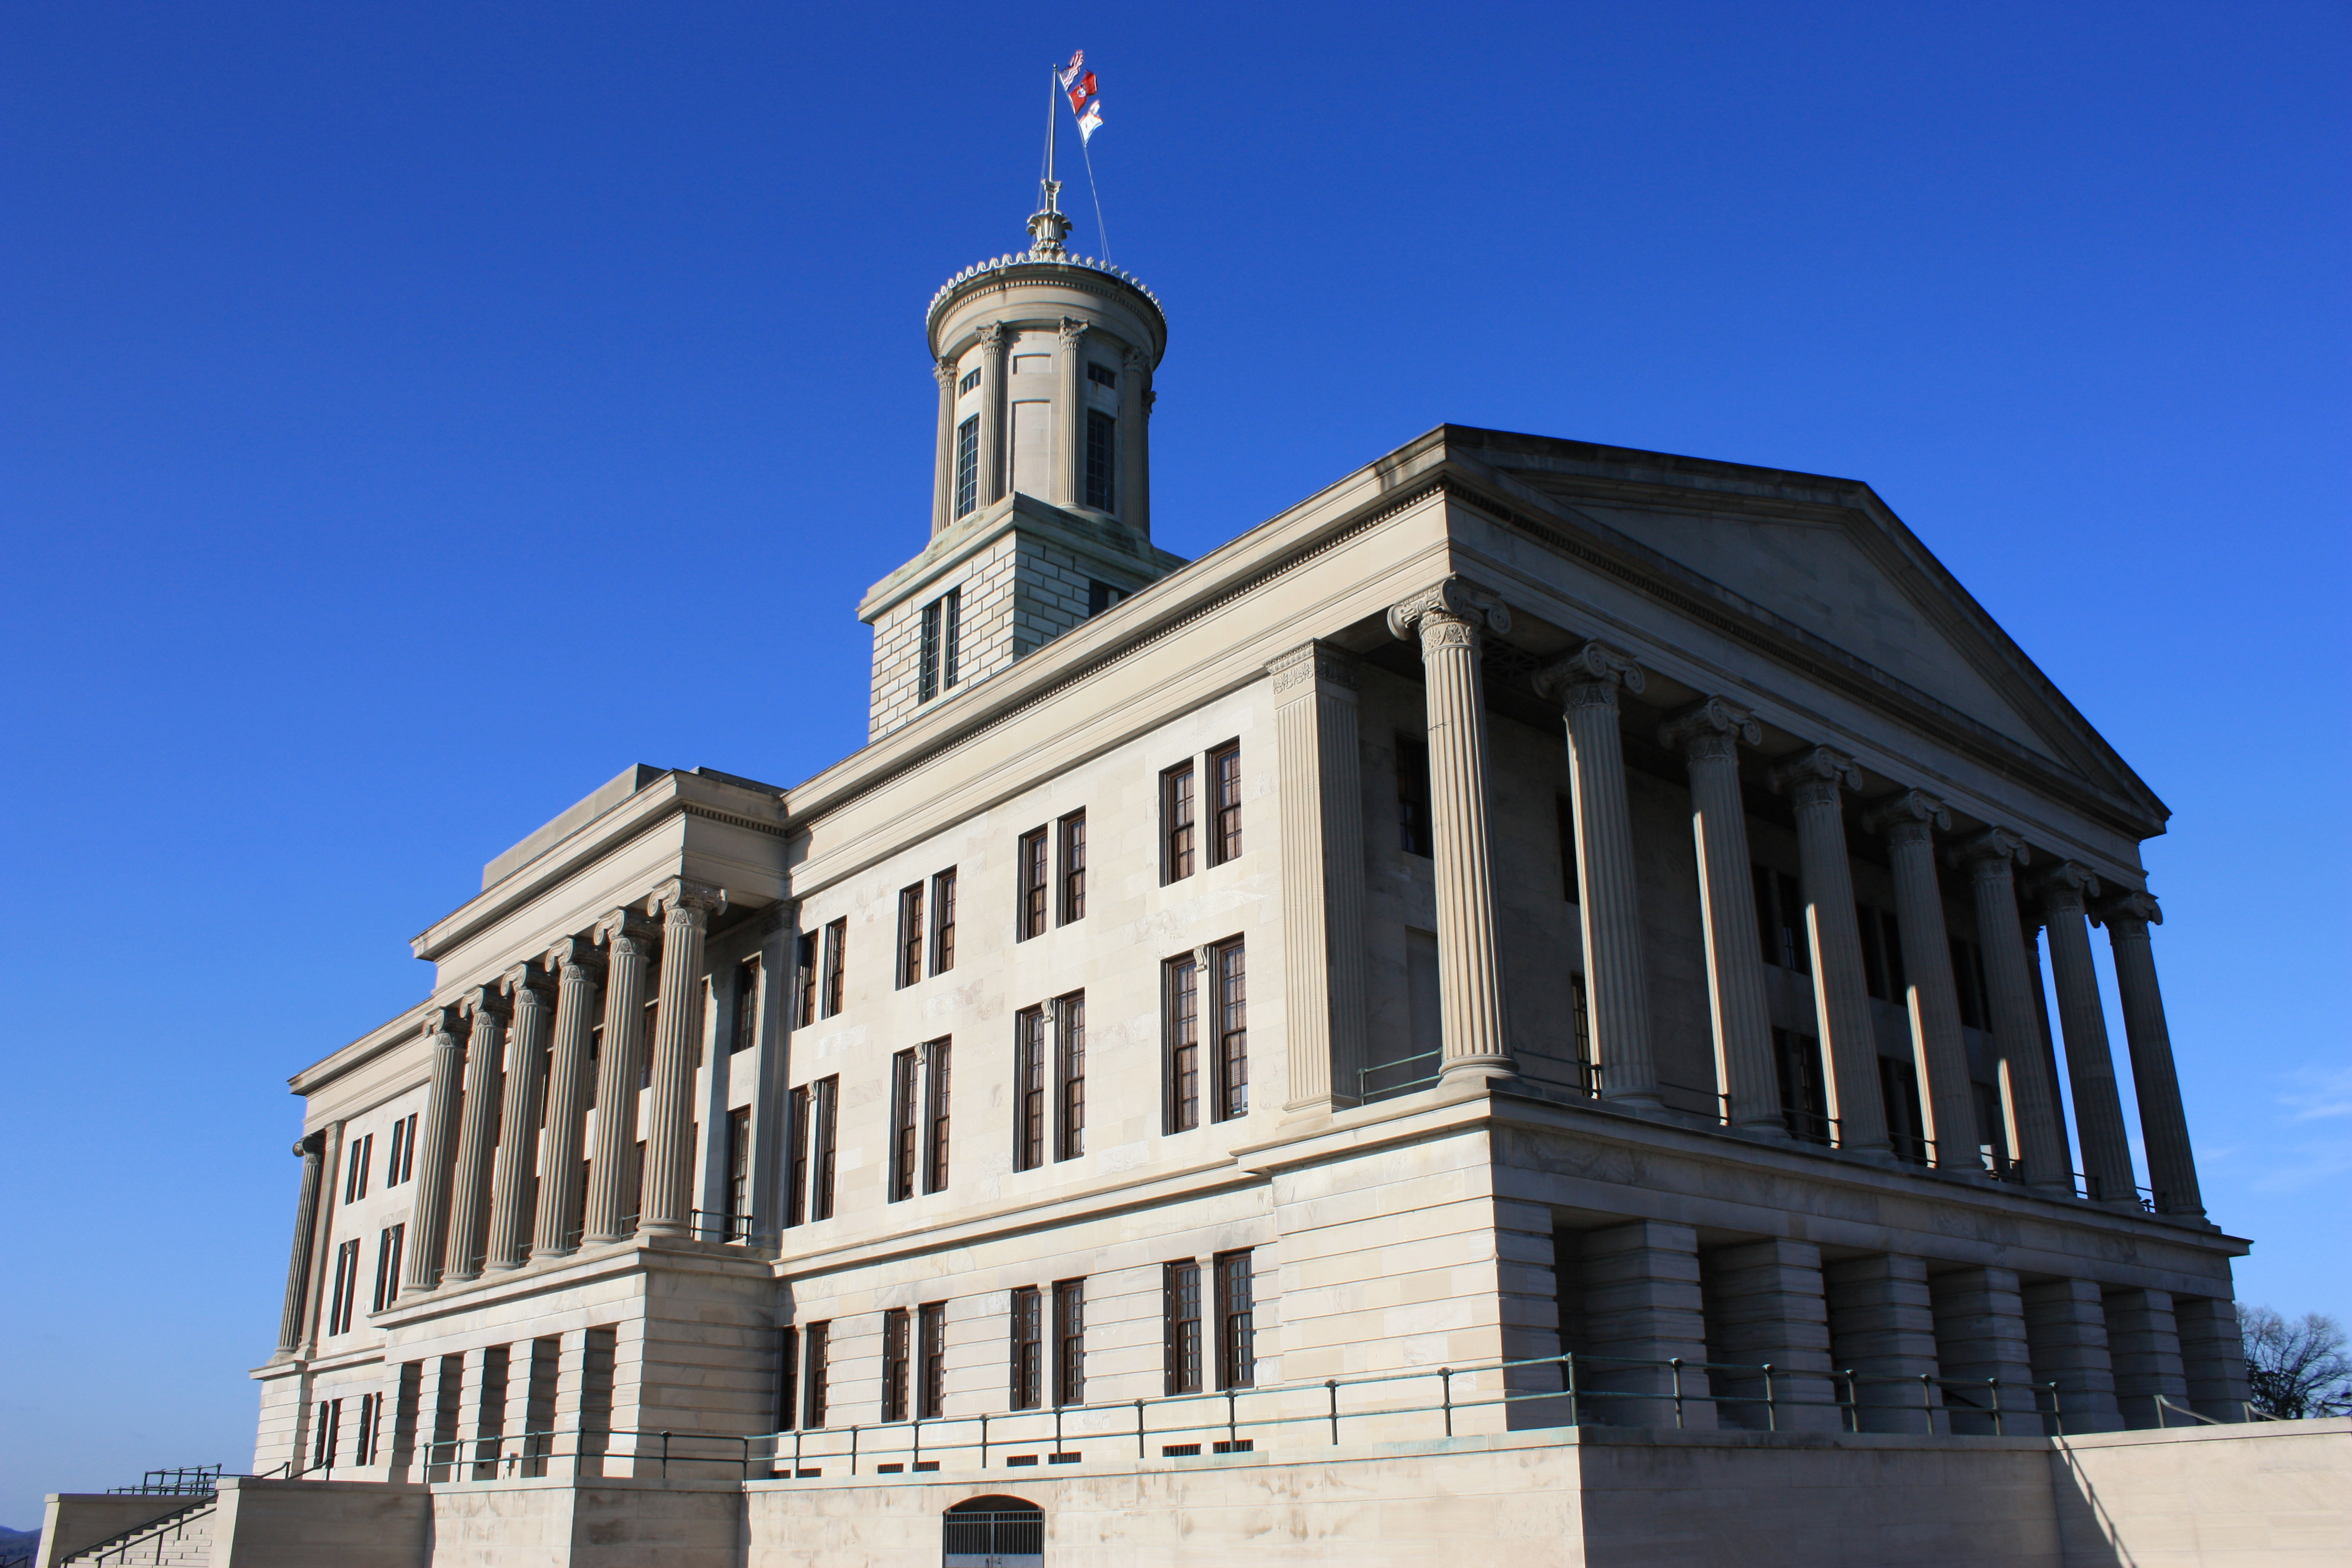 The Tennessee State Capitol, located in Nashville, Tennessee, is the home of the General Assembly of Tennessee (state legislature), the location of the governor's office, and a National Historic Landmark. Designed by architect William Strickland (1788-1854), of Philadelphia, Pennsylvania and Nashville, it is one of Nashville's most prominent examples of Greek Revival architecture. The cornerstone of the Tennessee state capitol was itself laid on July 4, 1845 and the building was completed fourteen years later in 1859. Photo taken on March 1, 2009.